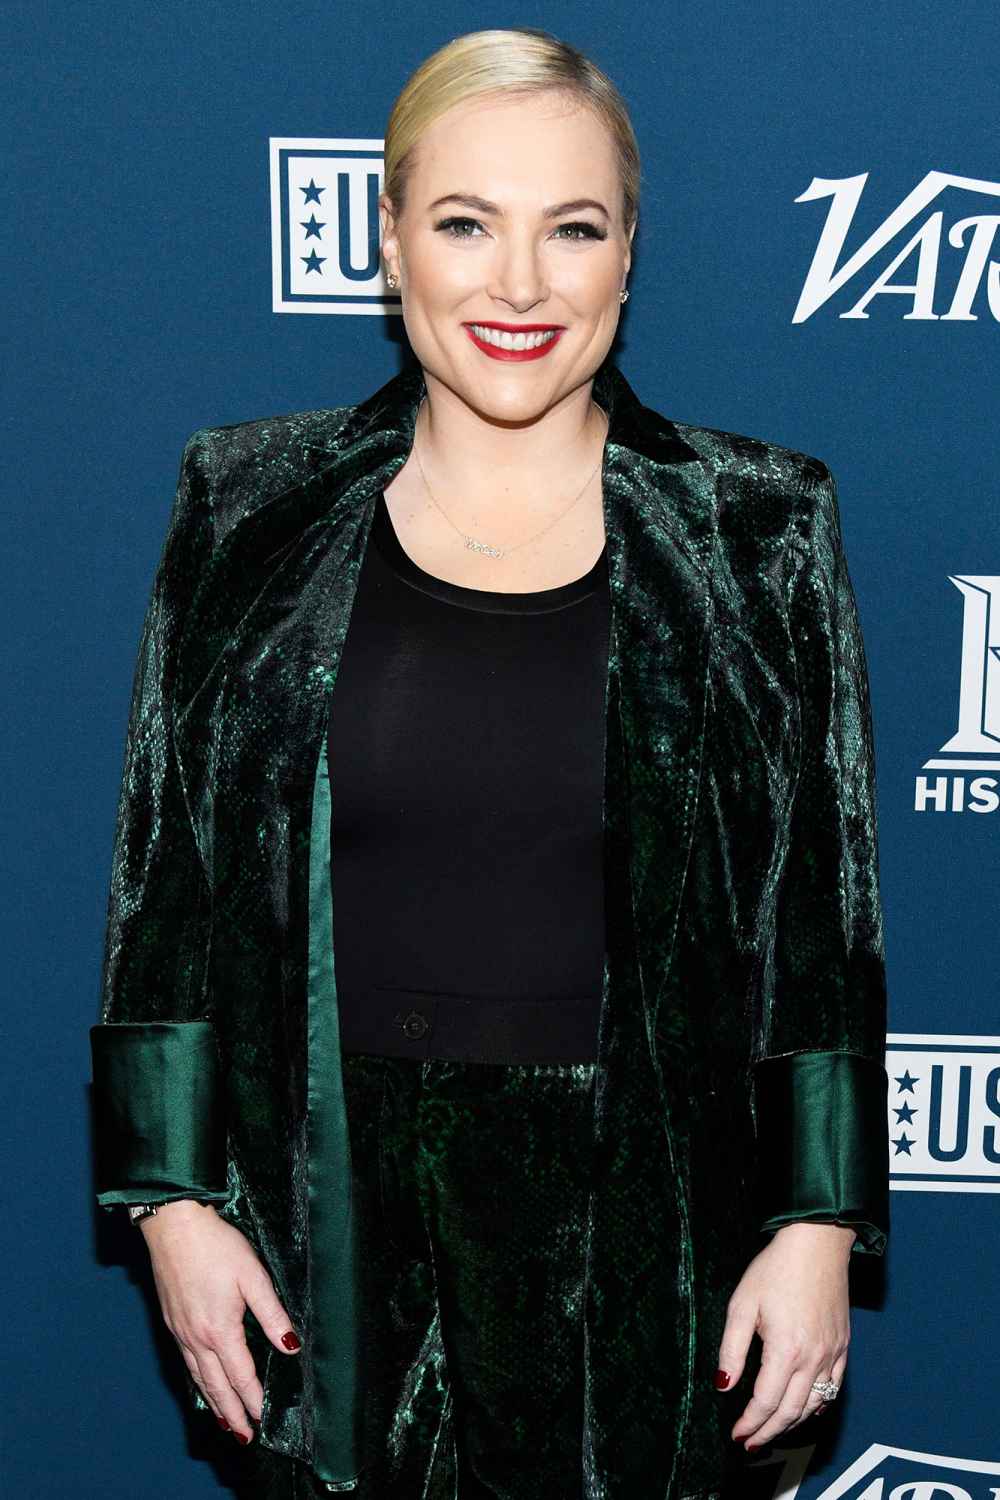 Why Meghan McCain Is Hiding Pregnancy ‘Pics and Details’ Ahead of 1st Child’s Arrival